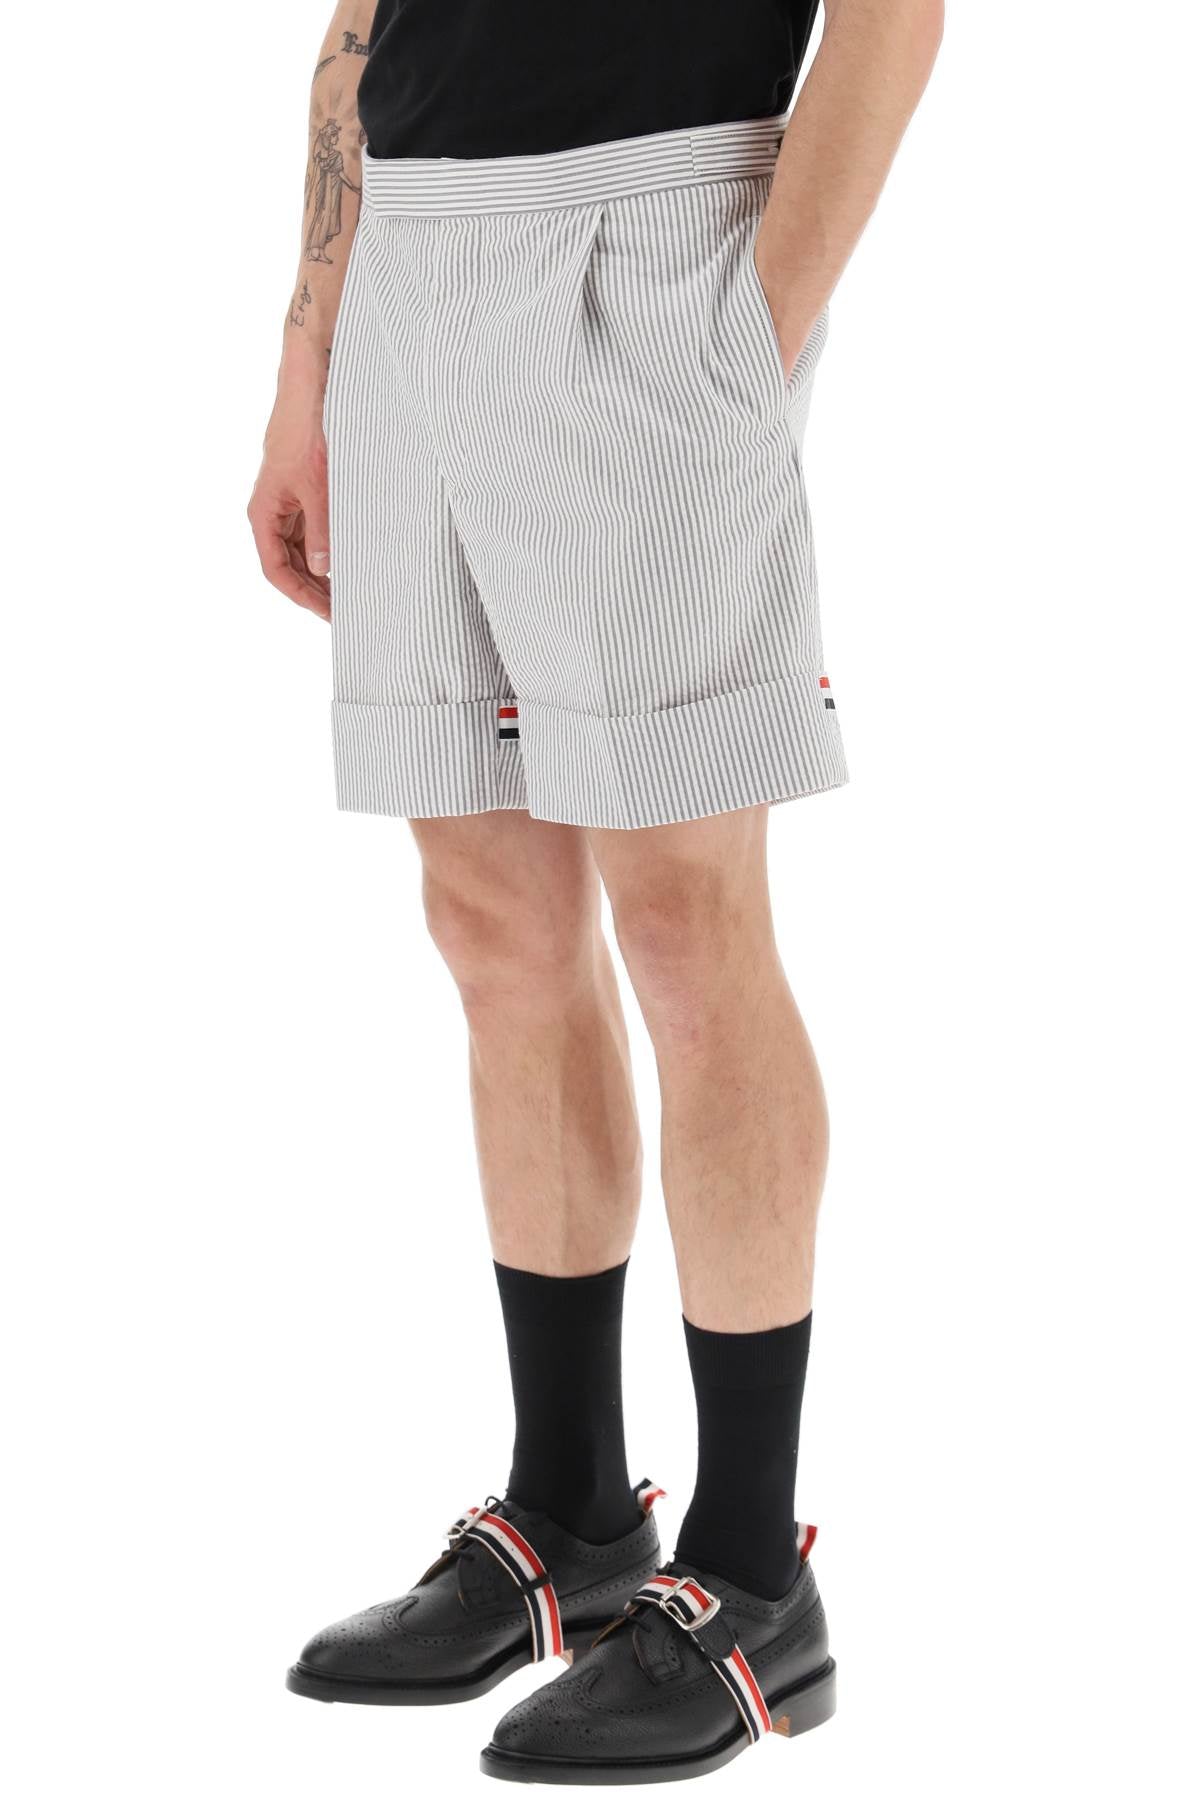 Thom browne striped shorts with tricolor details-3